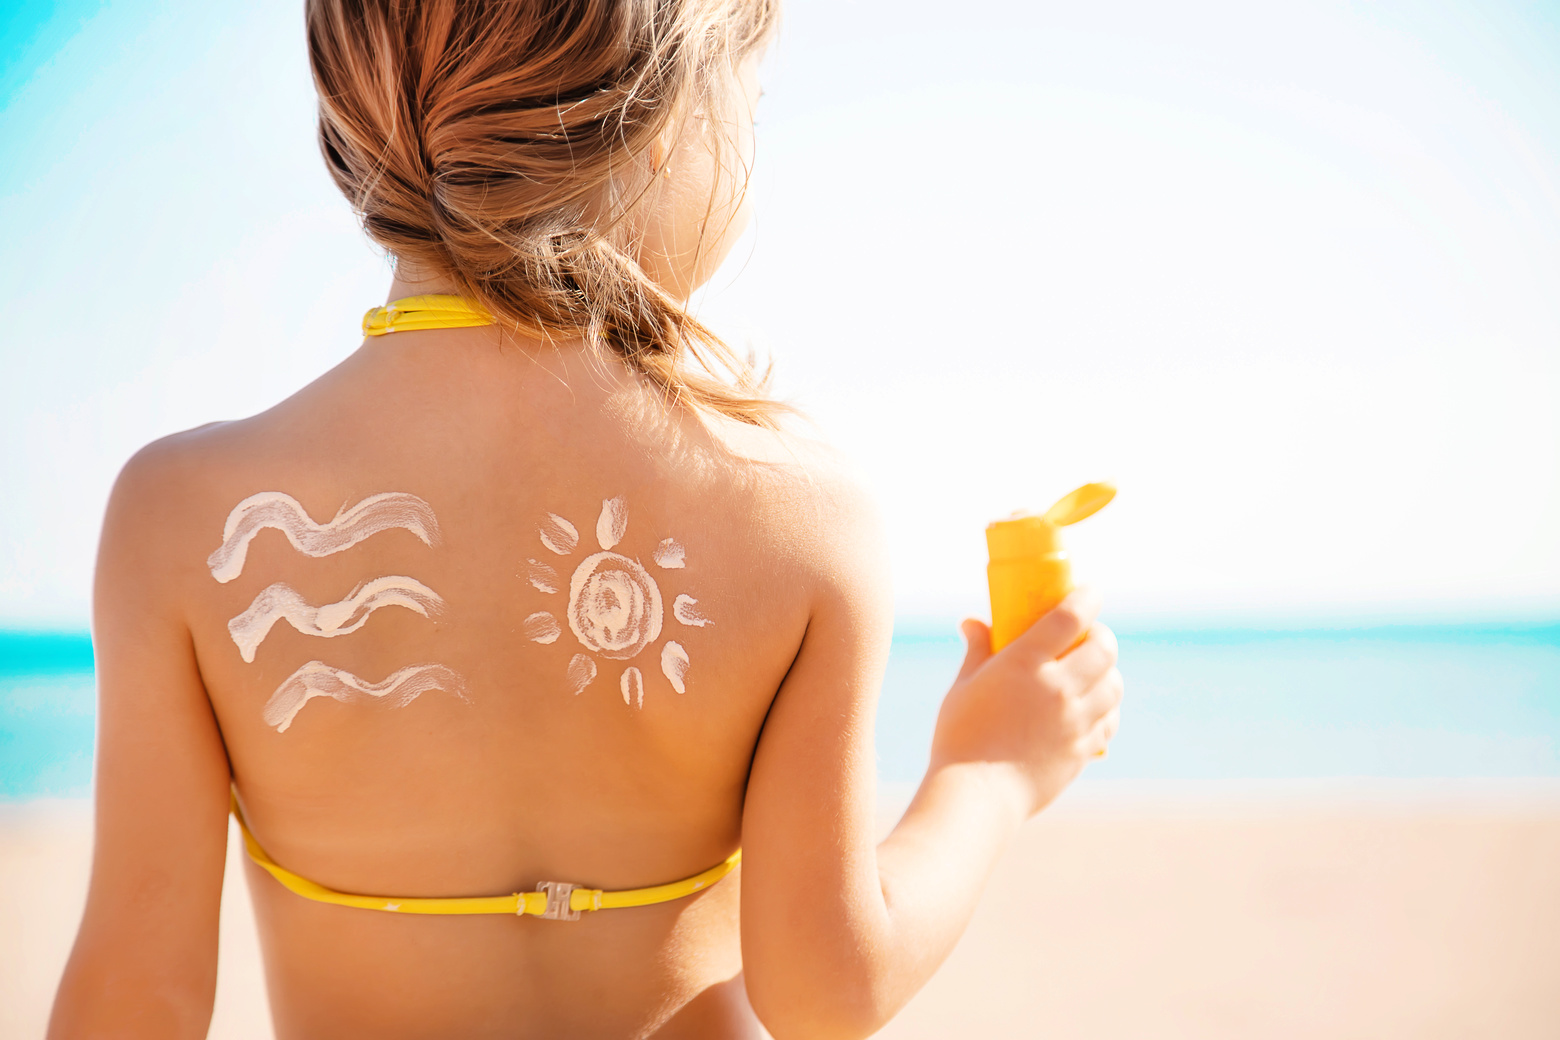 young girl at beach with sunscreen on her back